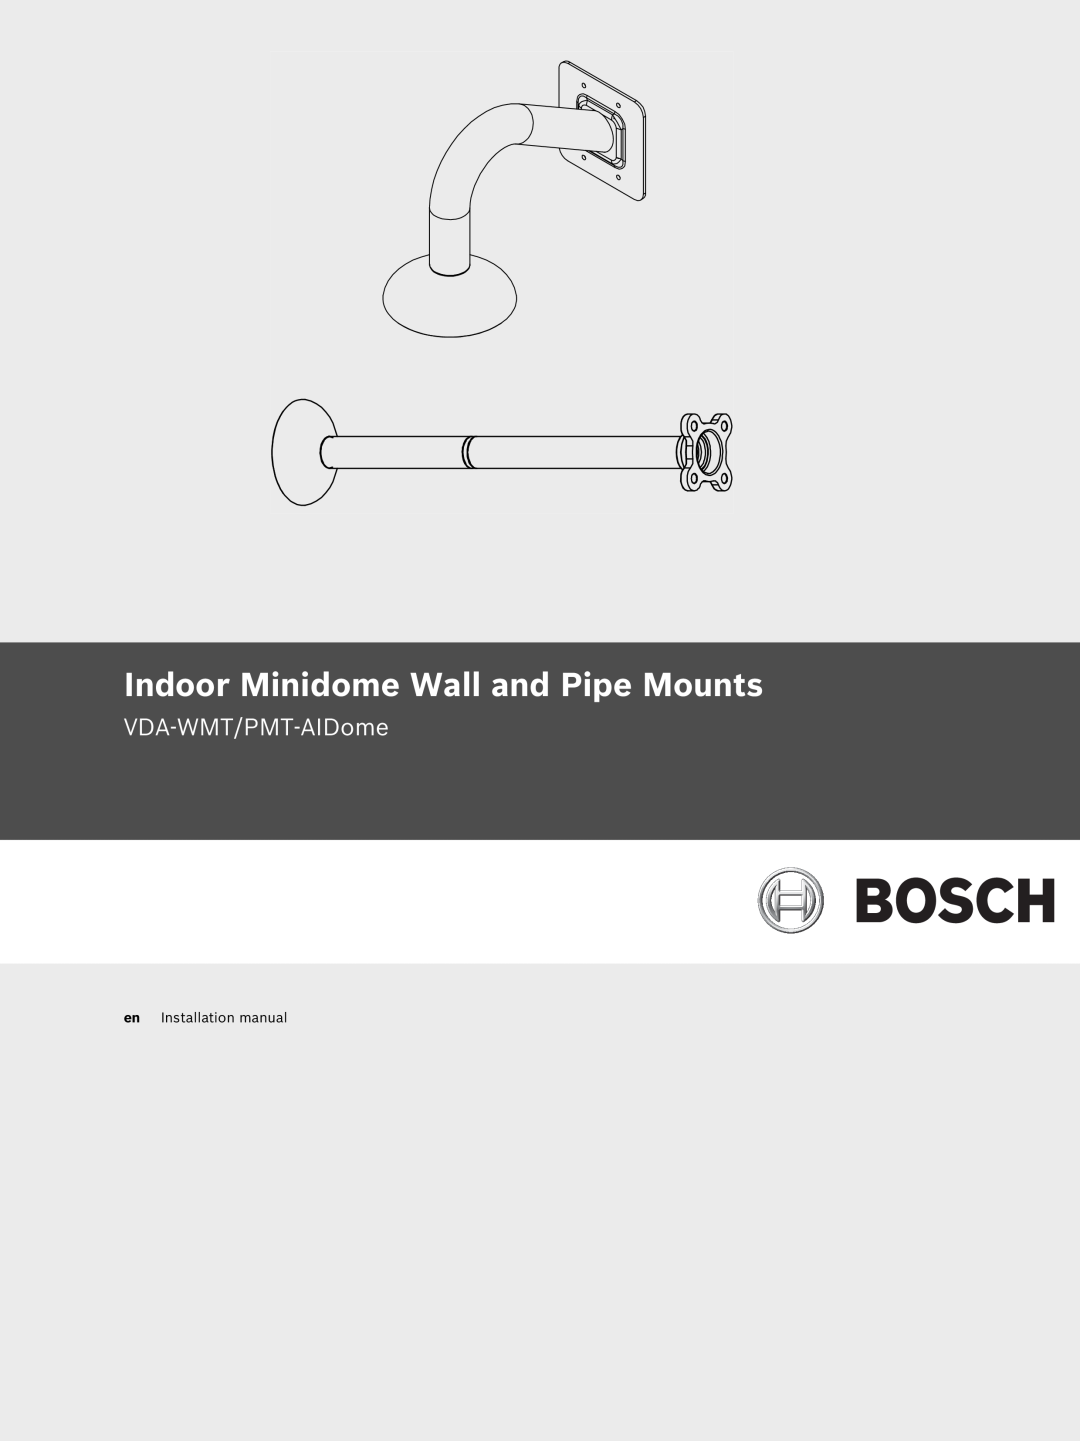 Bosch Appliances installation manual Indoor Minidome Wall and Pipe Mounts, VDA-WMT/PMT-AIDome, en Installation manual 